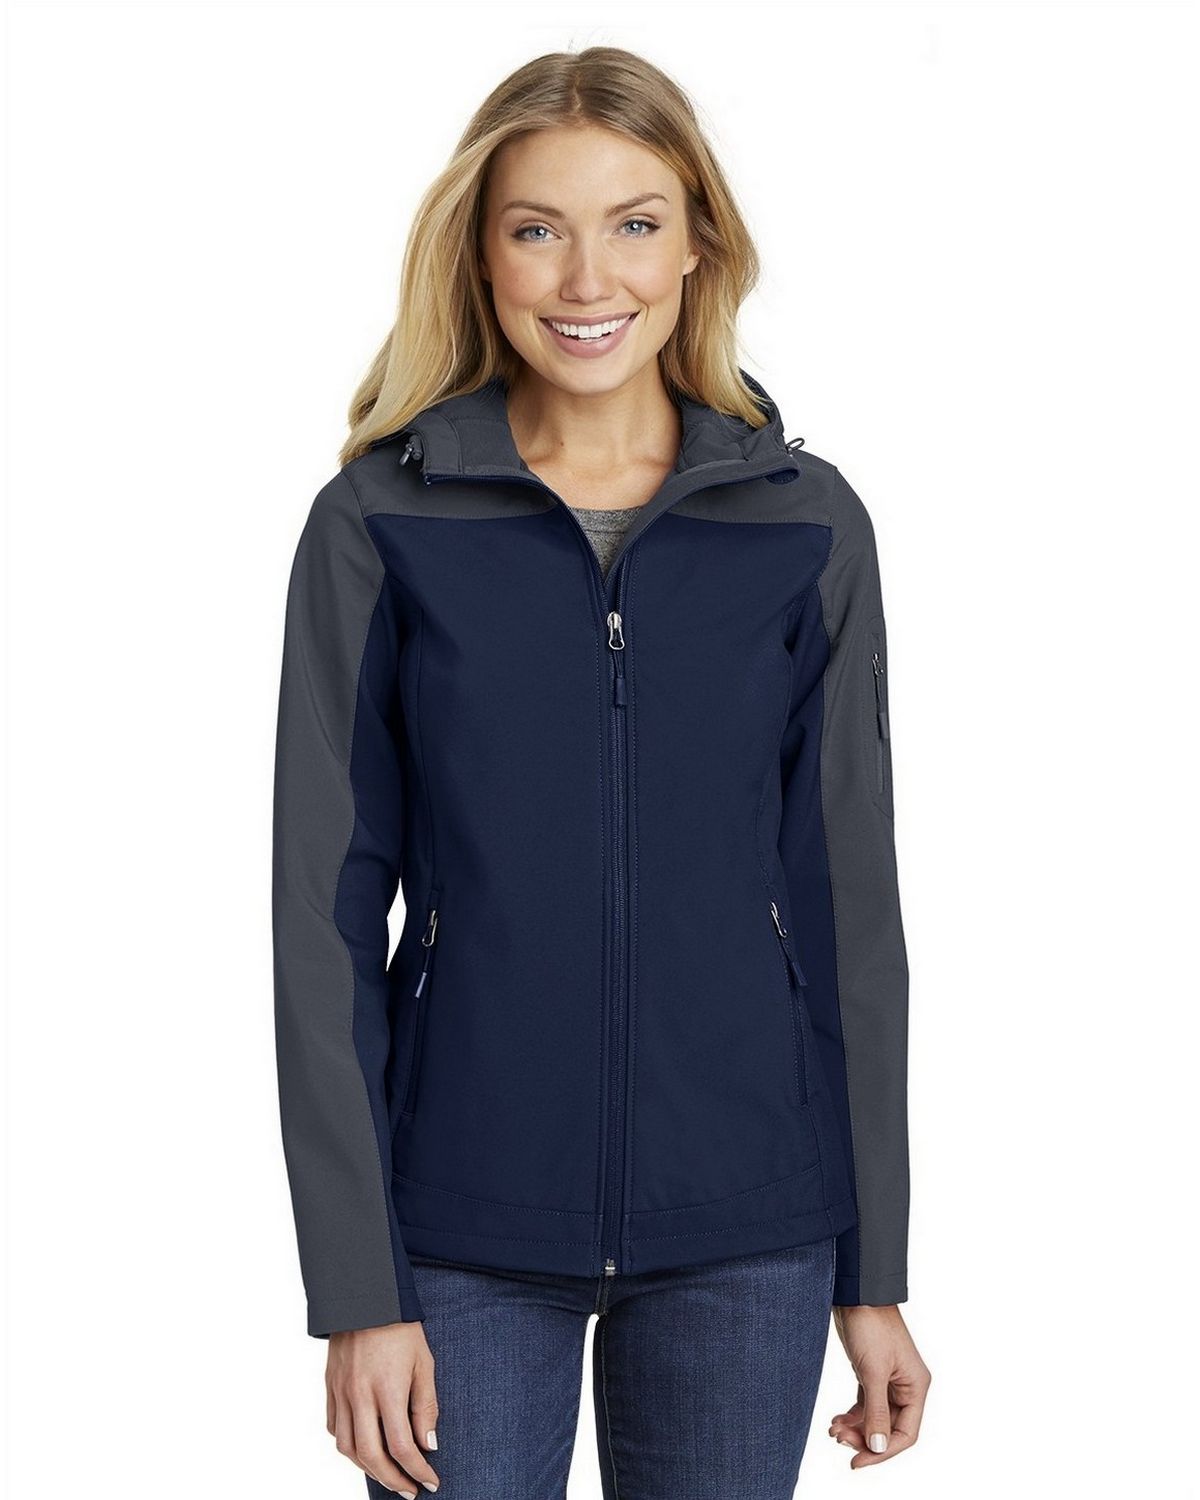 Port Authority L335 Ladies Hooded Core Soft Shell Jacket - ApparelnBags.com